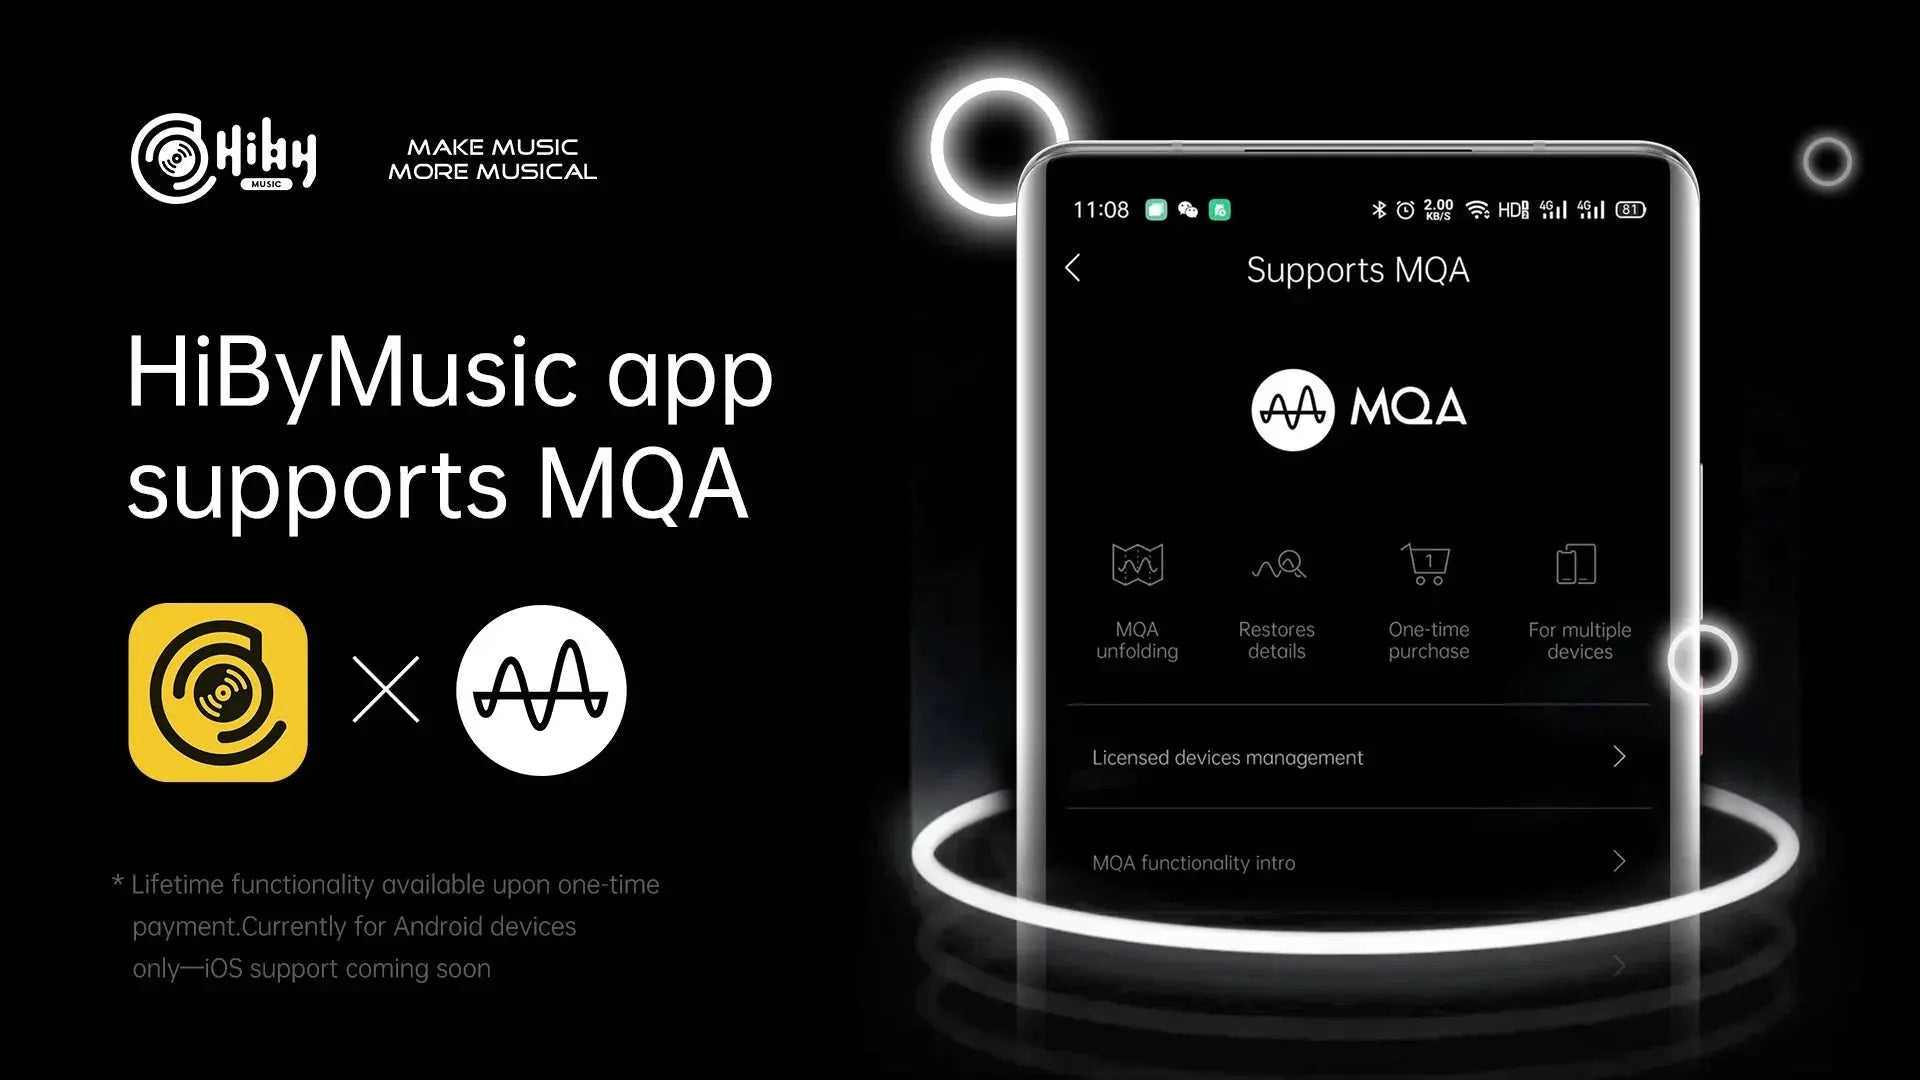 HIBY MUSIC PARTNERS WITH MQA TO OFFER HIGH FIDELITY AUDIO